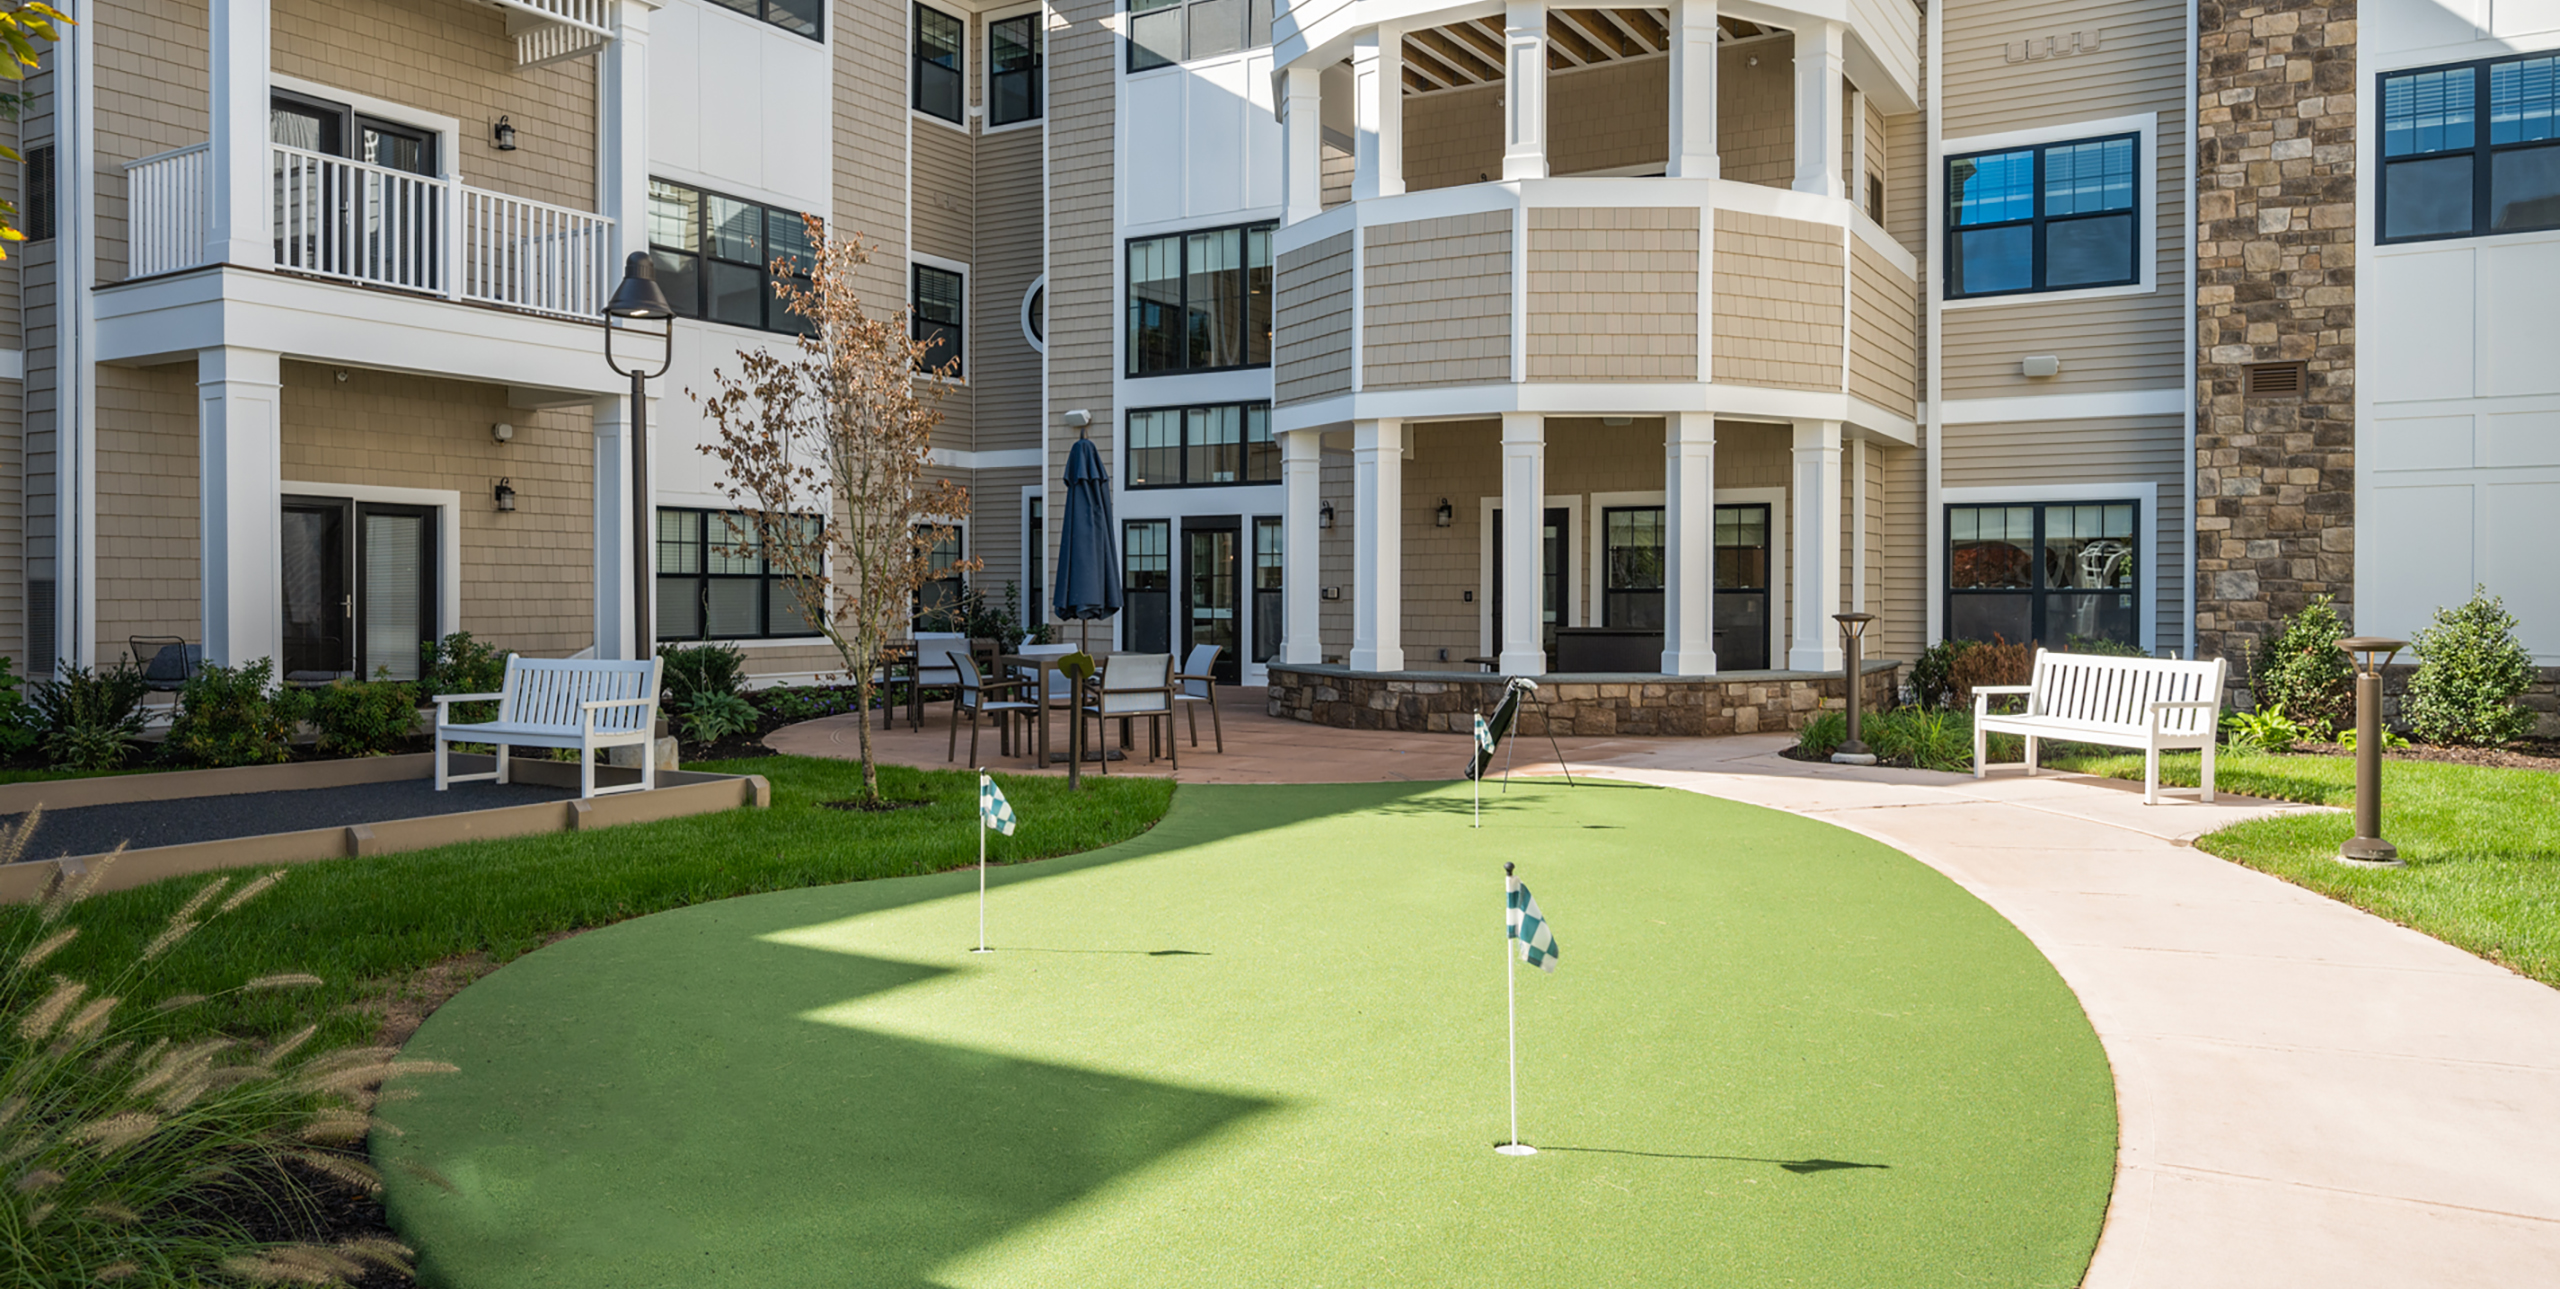 Putting green in the courtyard at Brightview Senior Living in Port Jeff